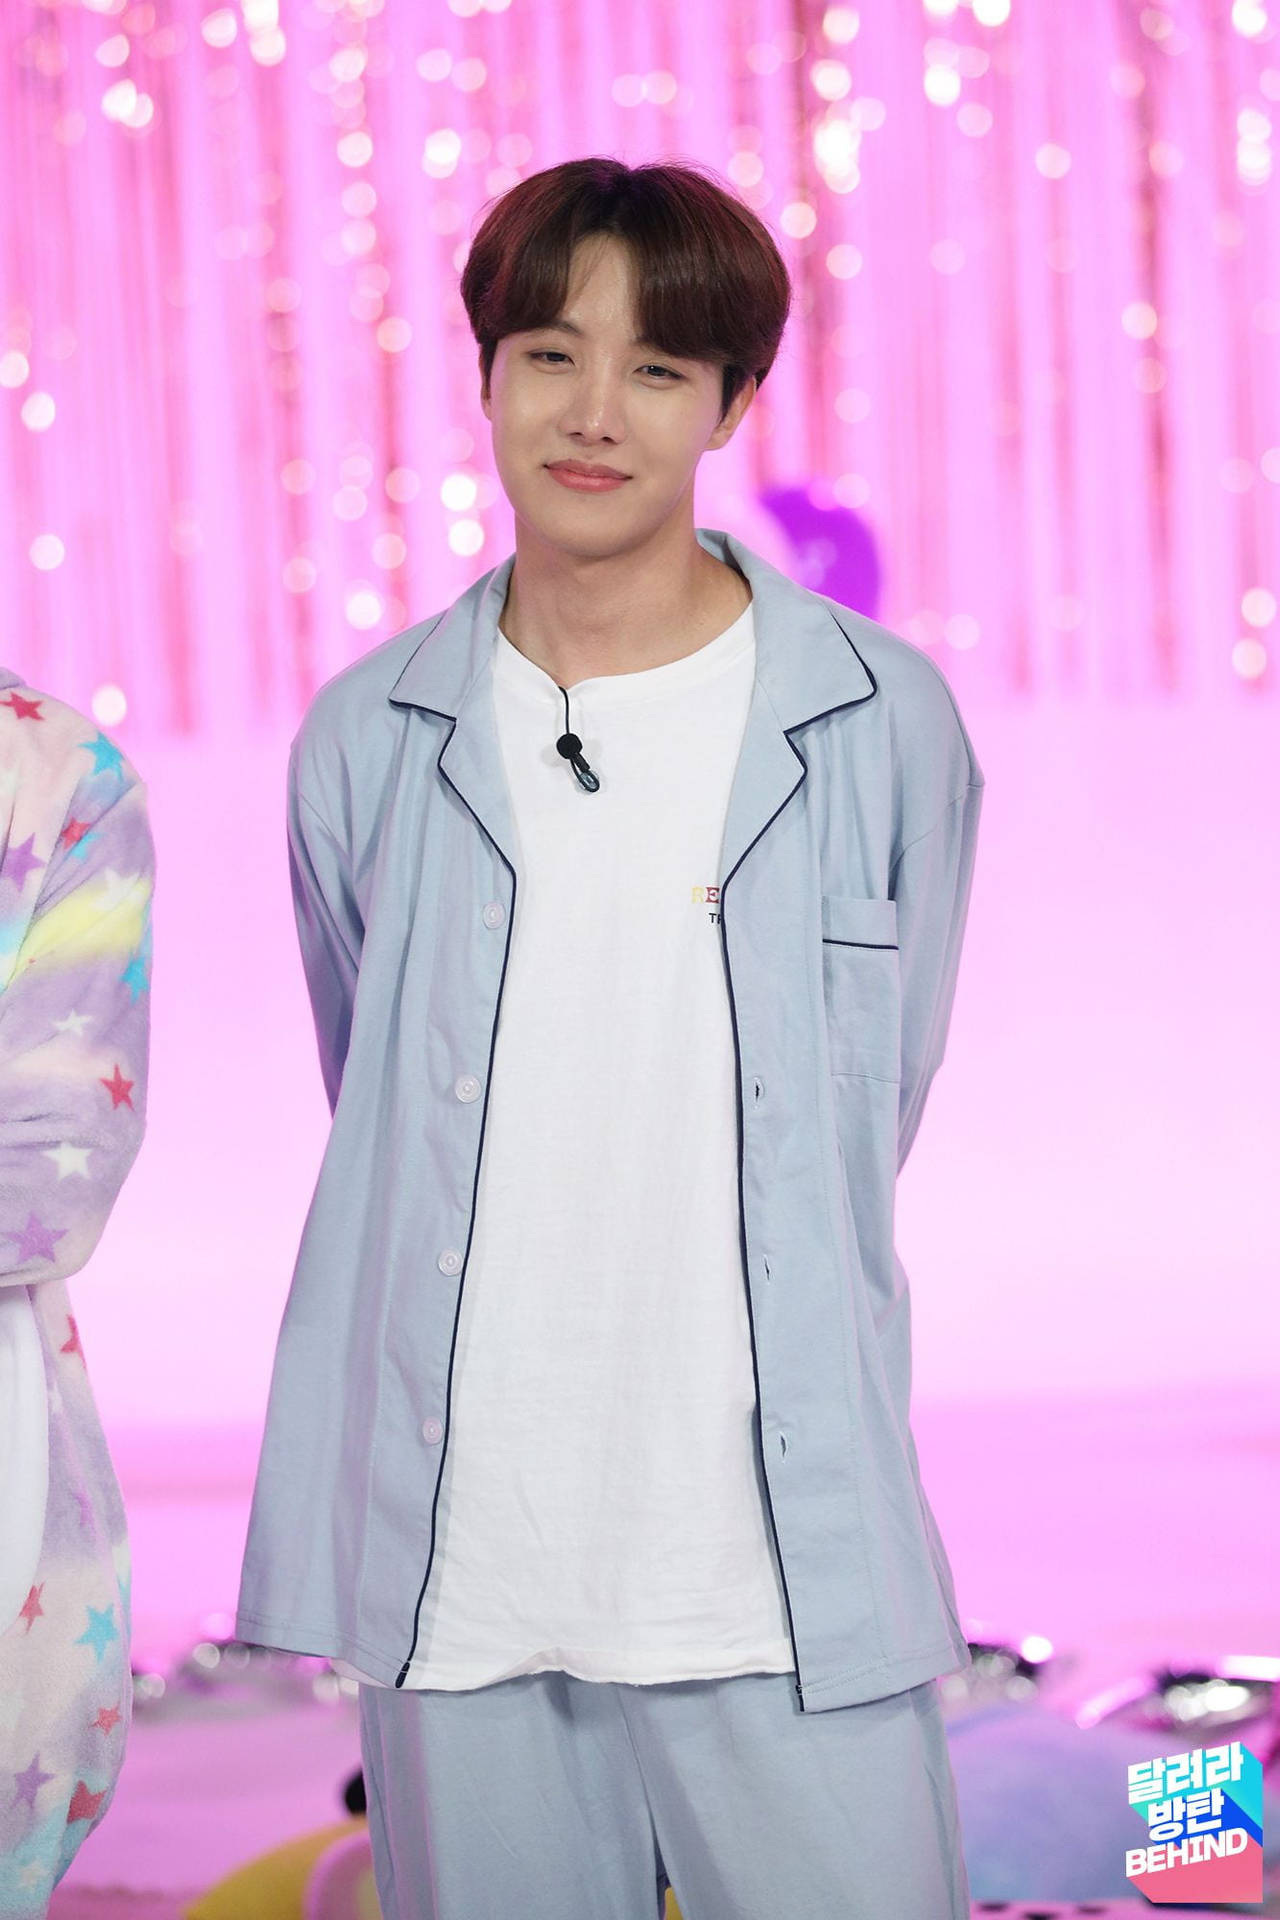 Jhope Cute Smiling On Purple Background Background